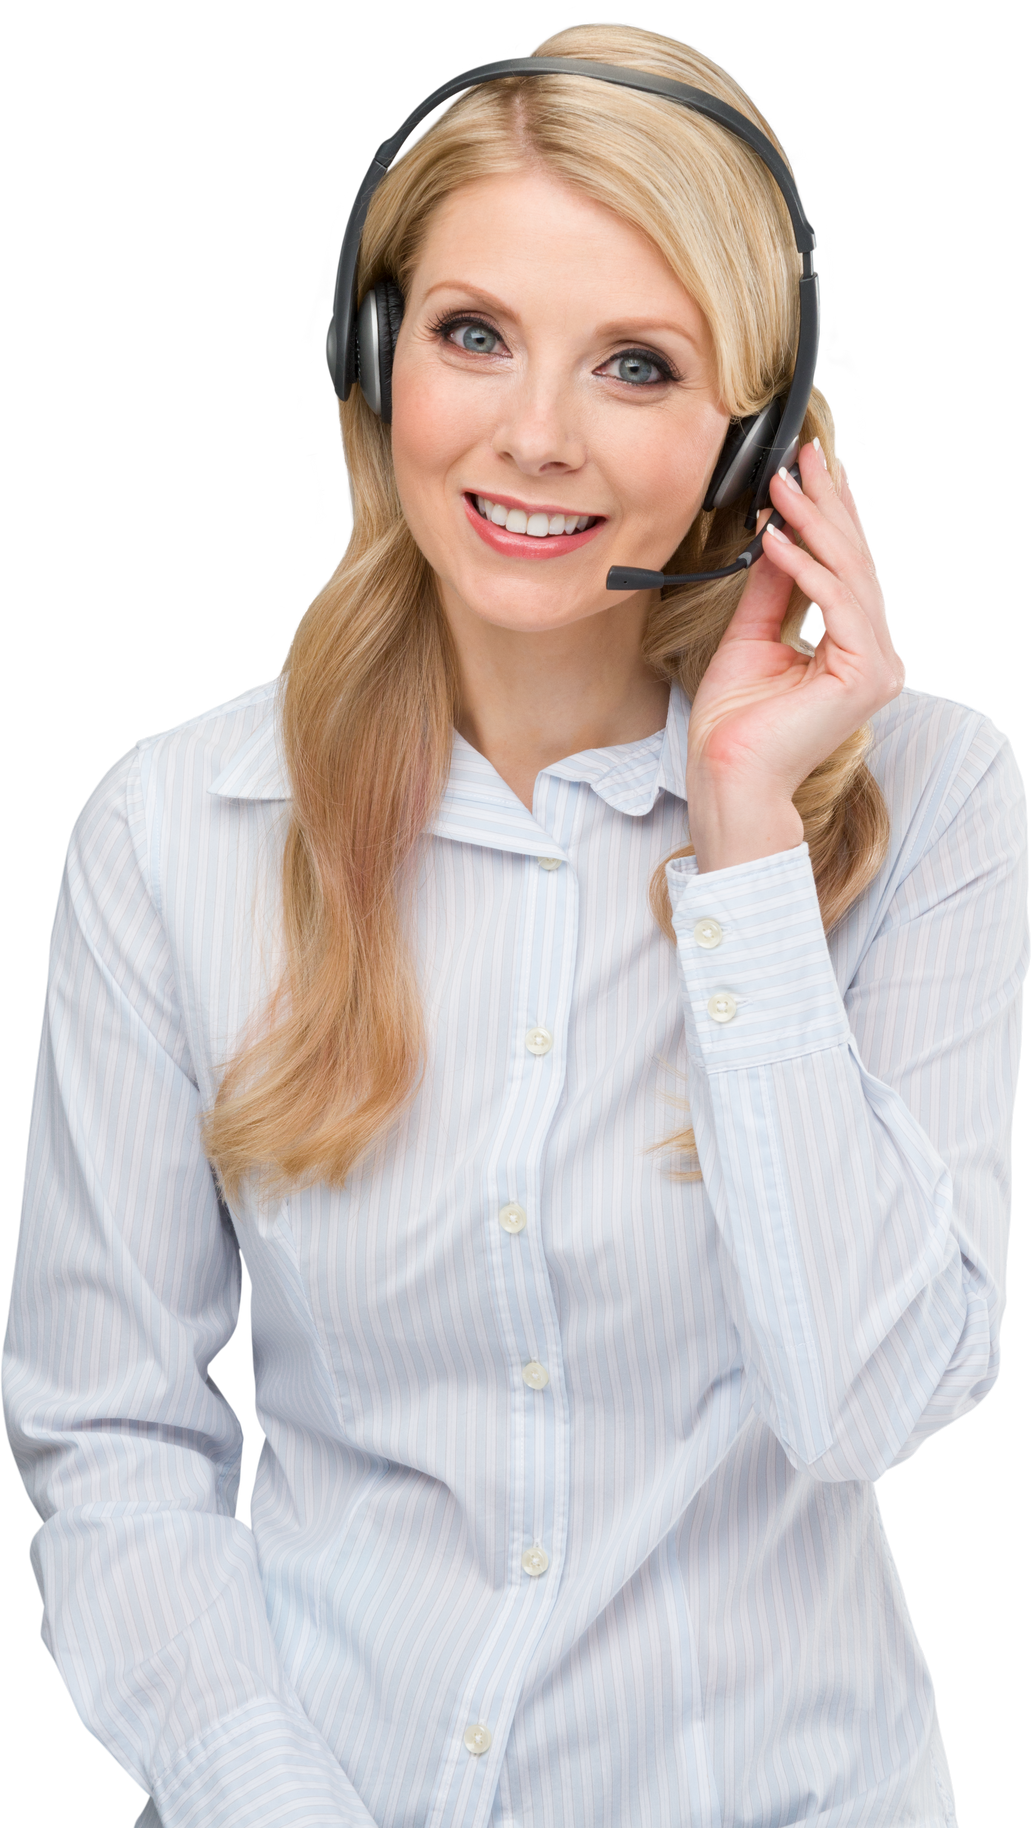 Friendly female customer service representative with long light blond hair in business casual outfit talking on headset - Isolat